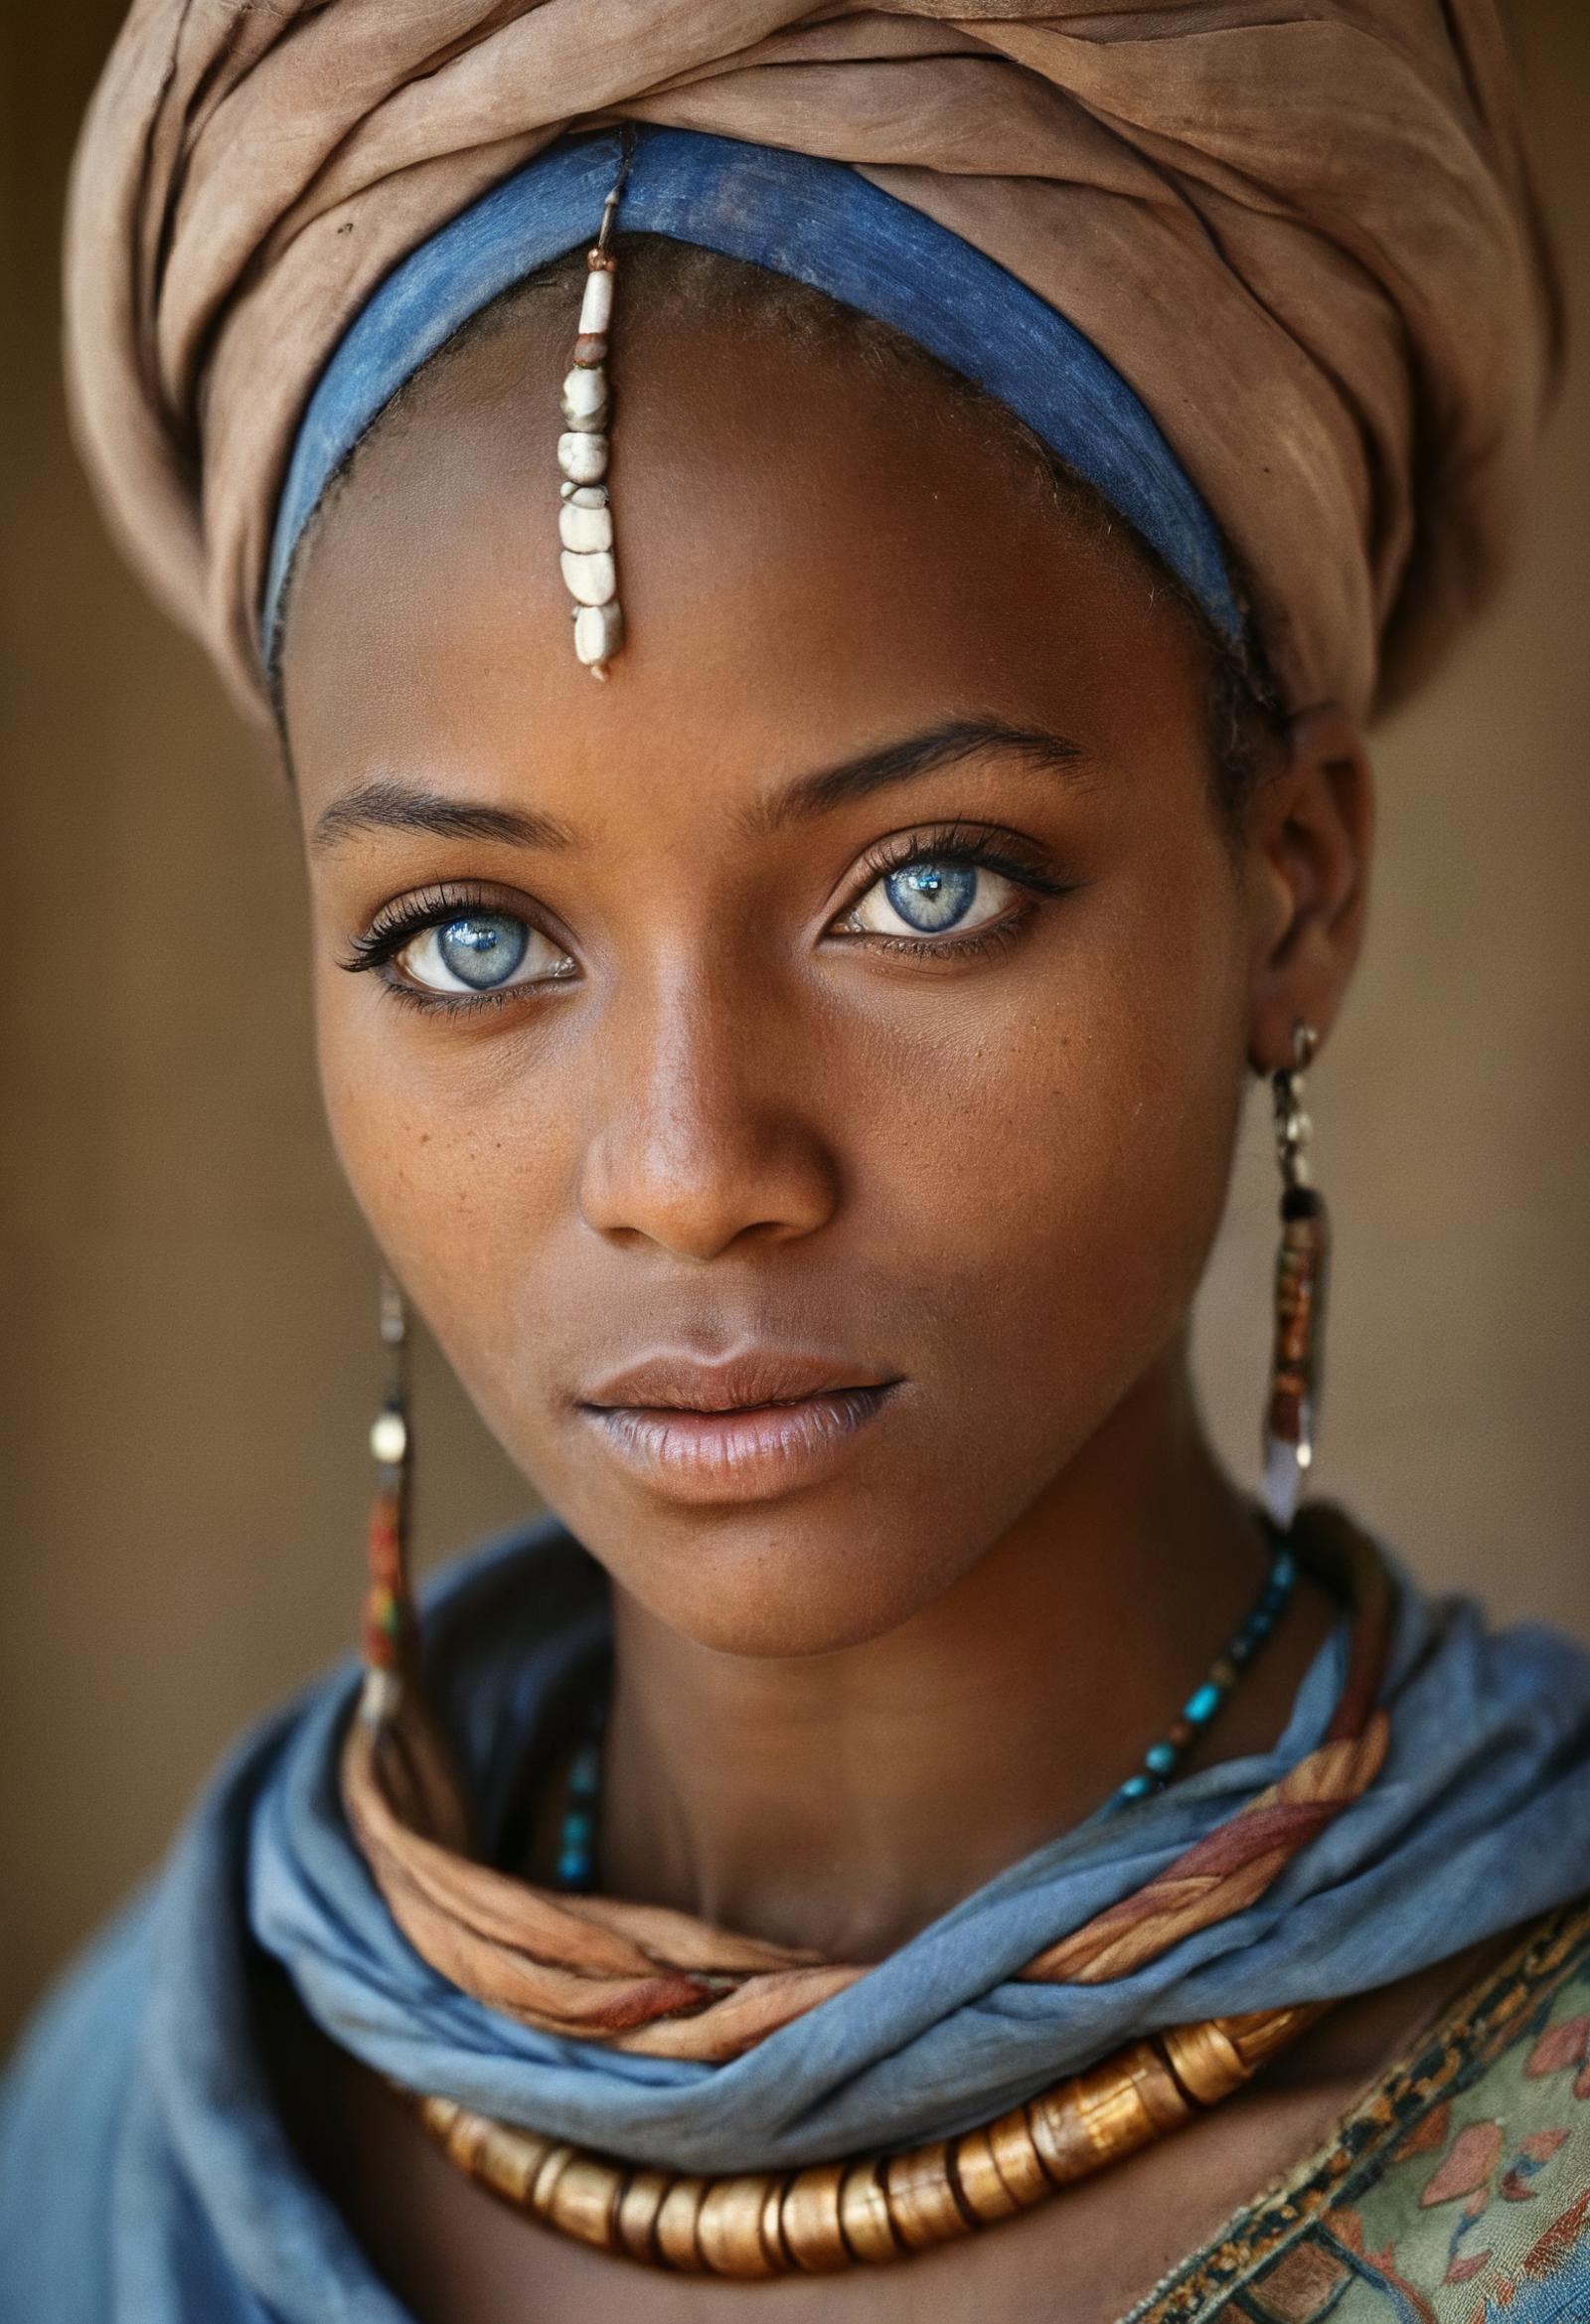 A beautiful young woman with blue eyes and a unique headpiece.